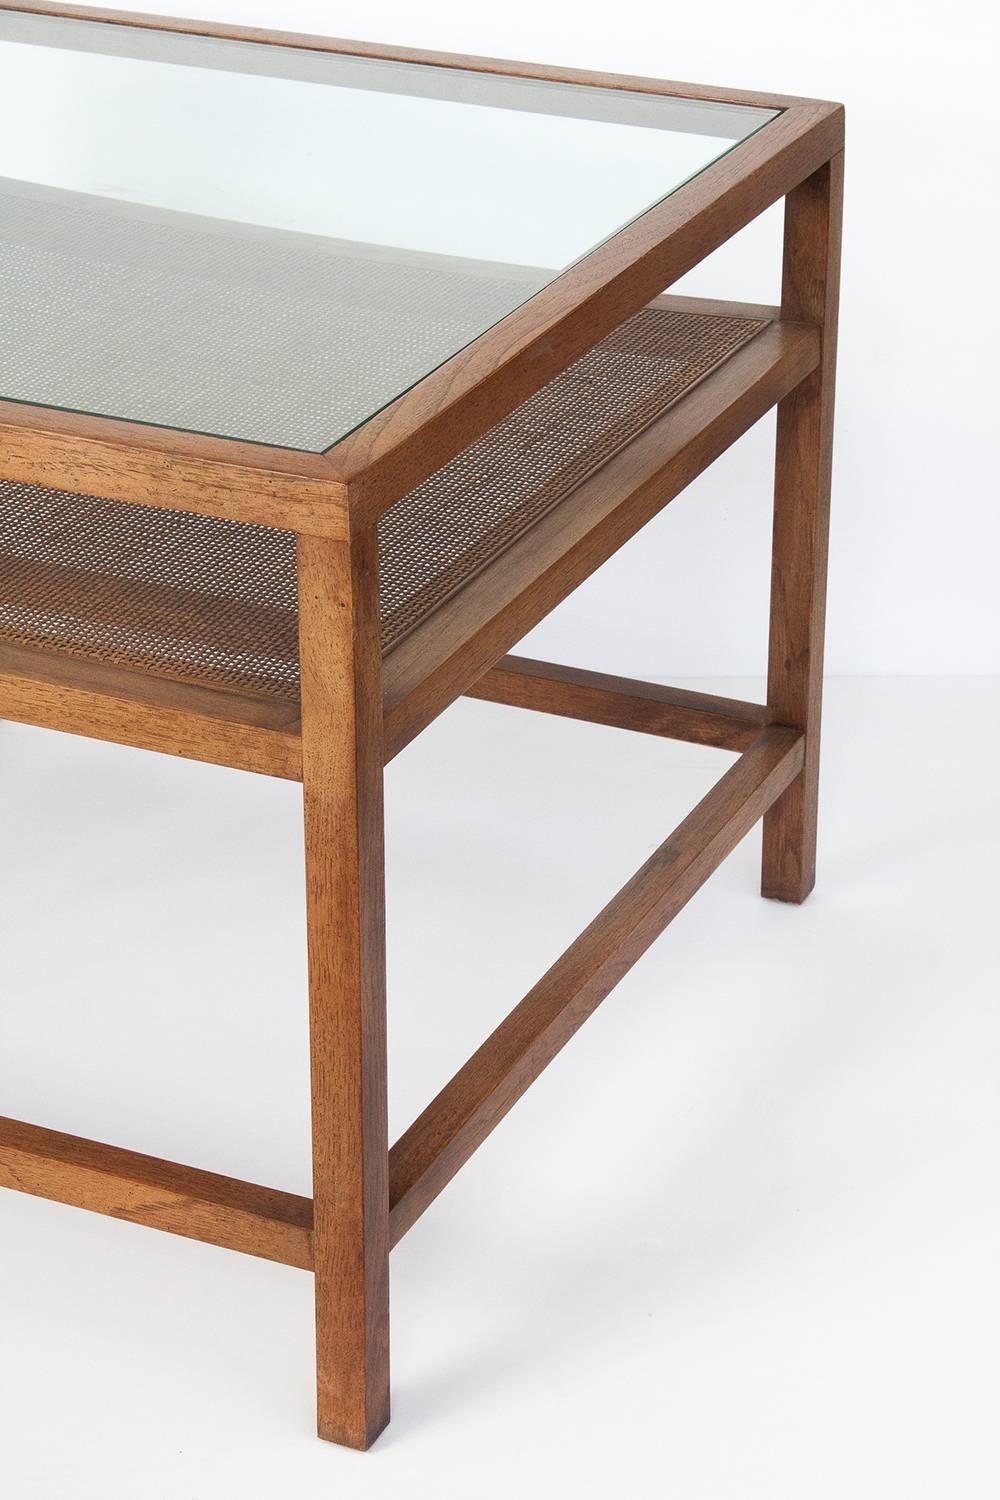 Pair of Square End Tables with Cane Shelf 1